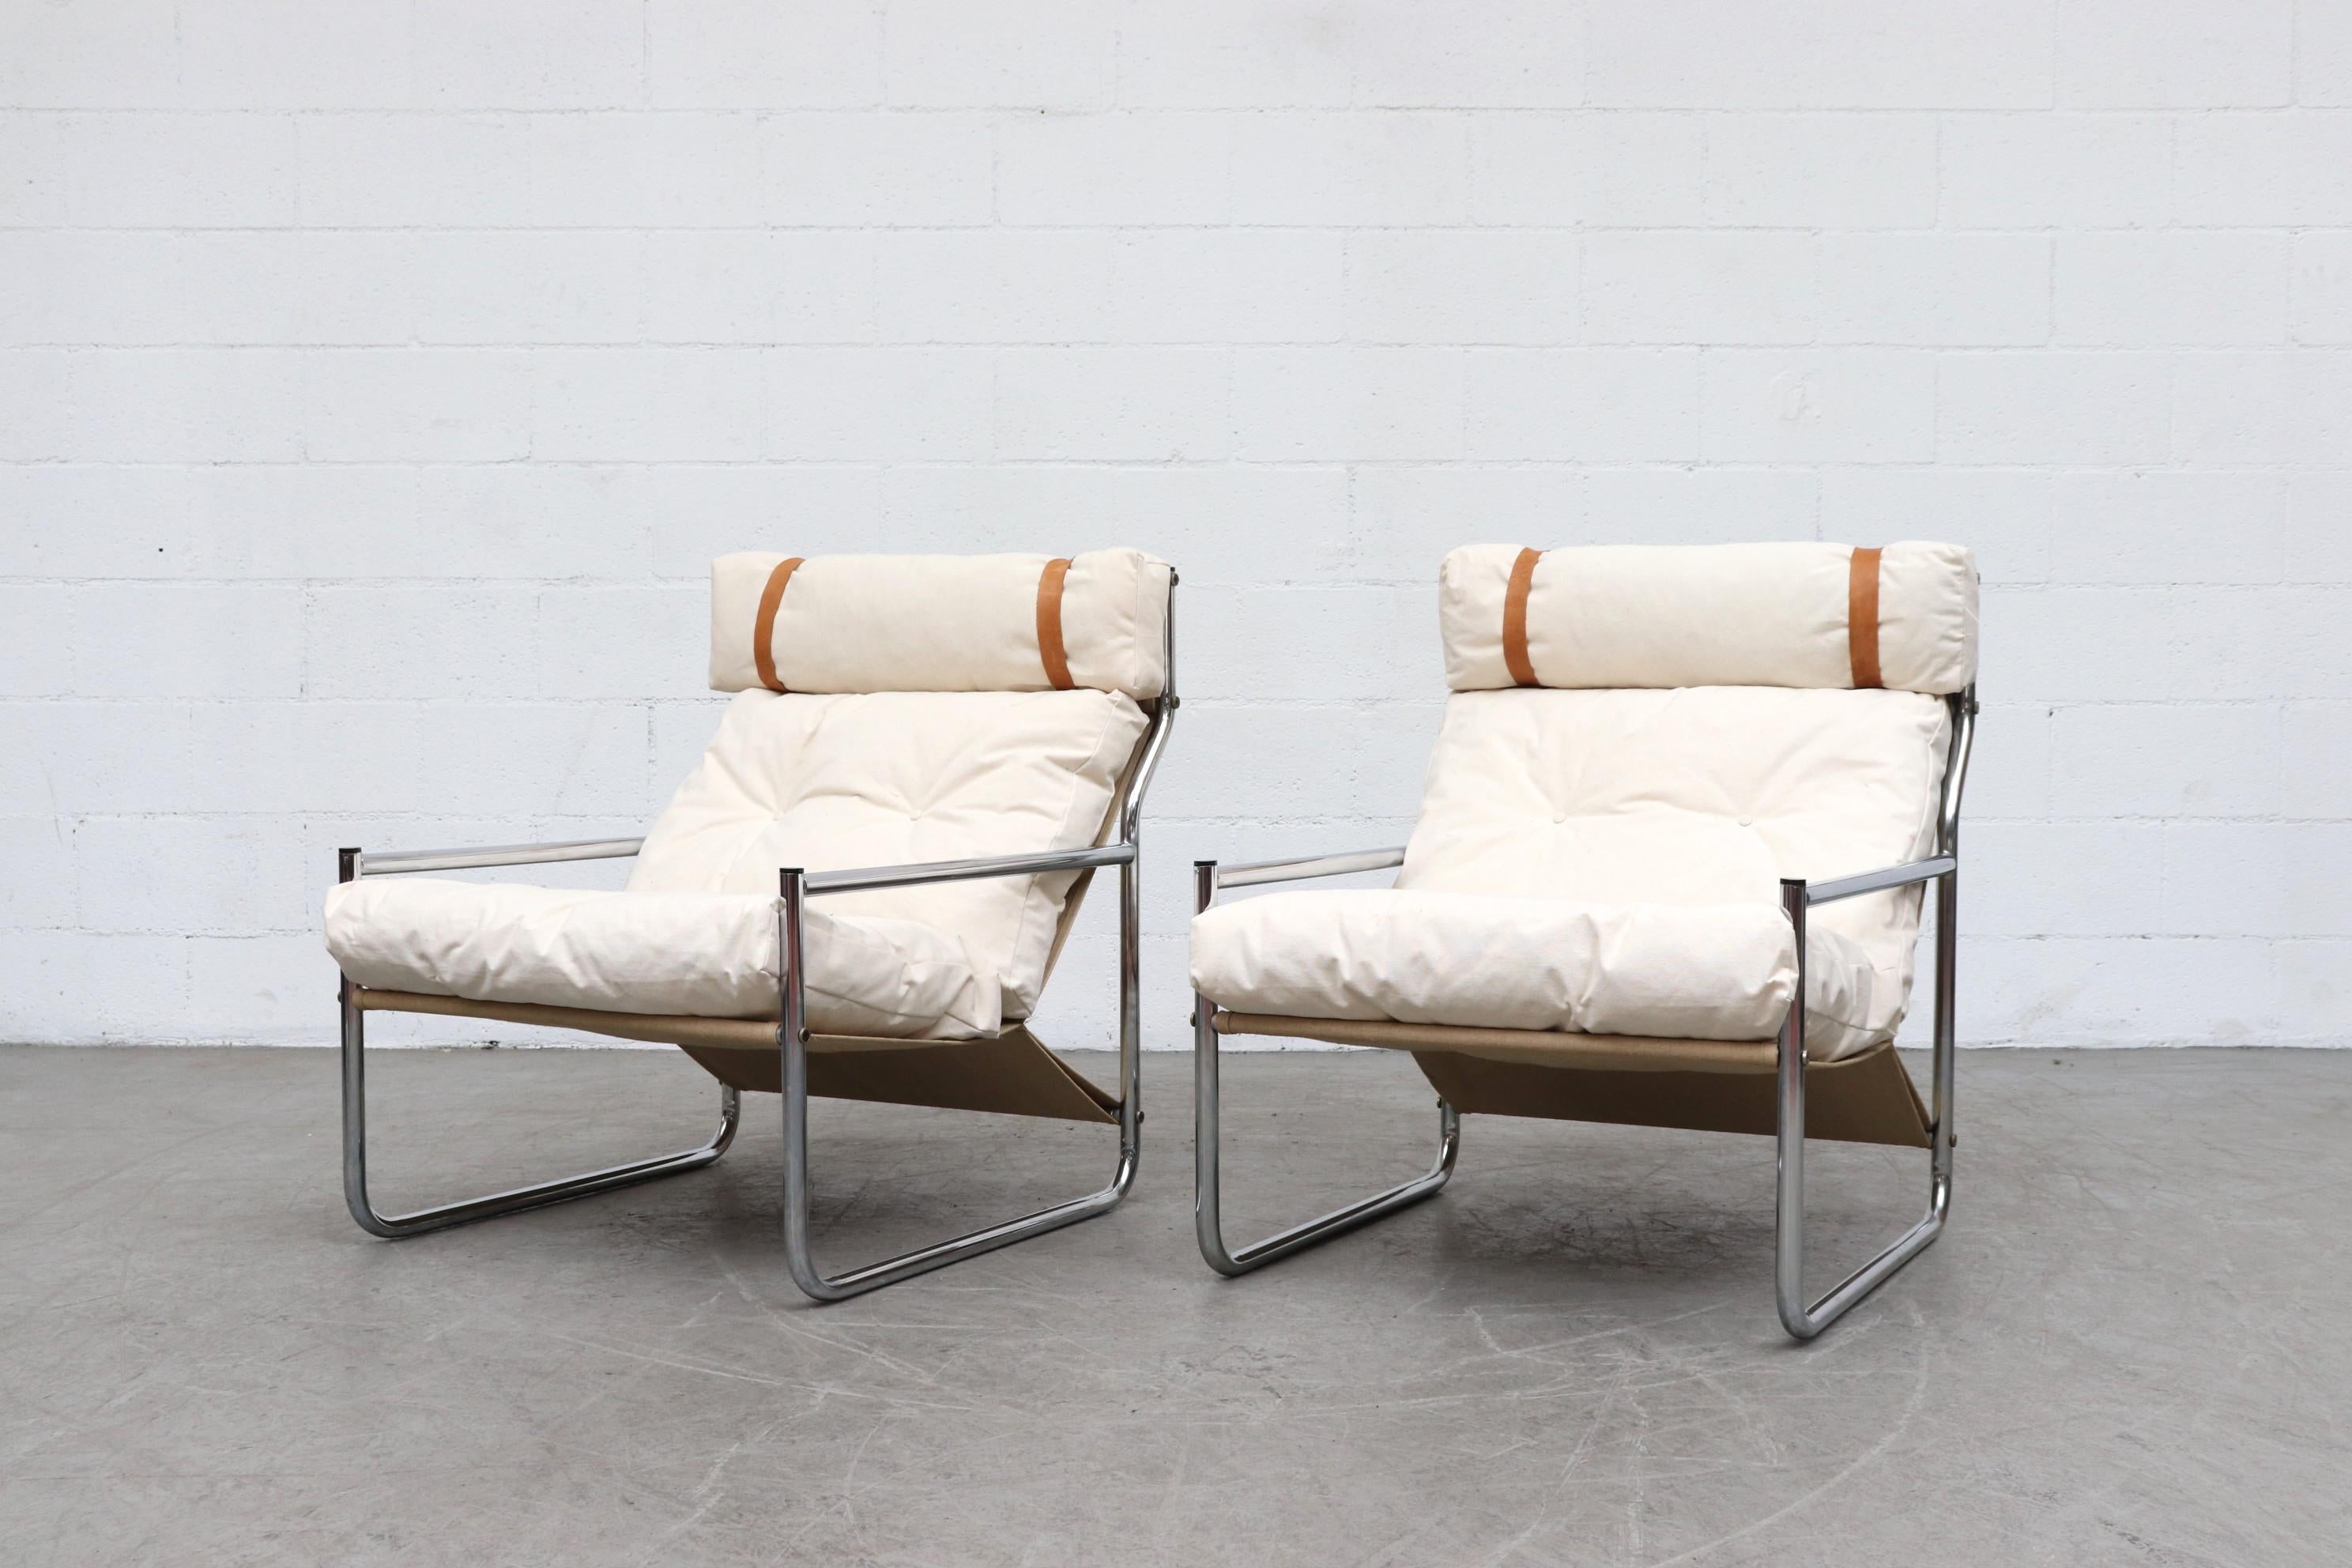 Pair of chrome and canvas lounge chairs with leather strapped headrests. Newly upholstered in white canvas with new leather straps holding the headrest pillows, original linen sling support and frame in original condition with some signs of wear